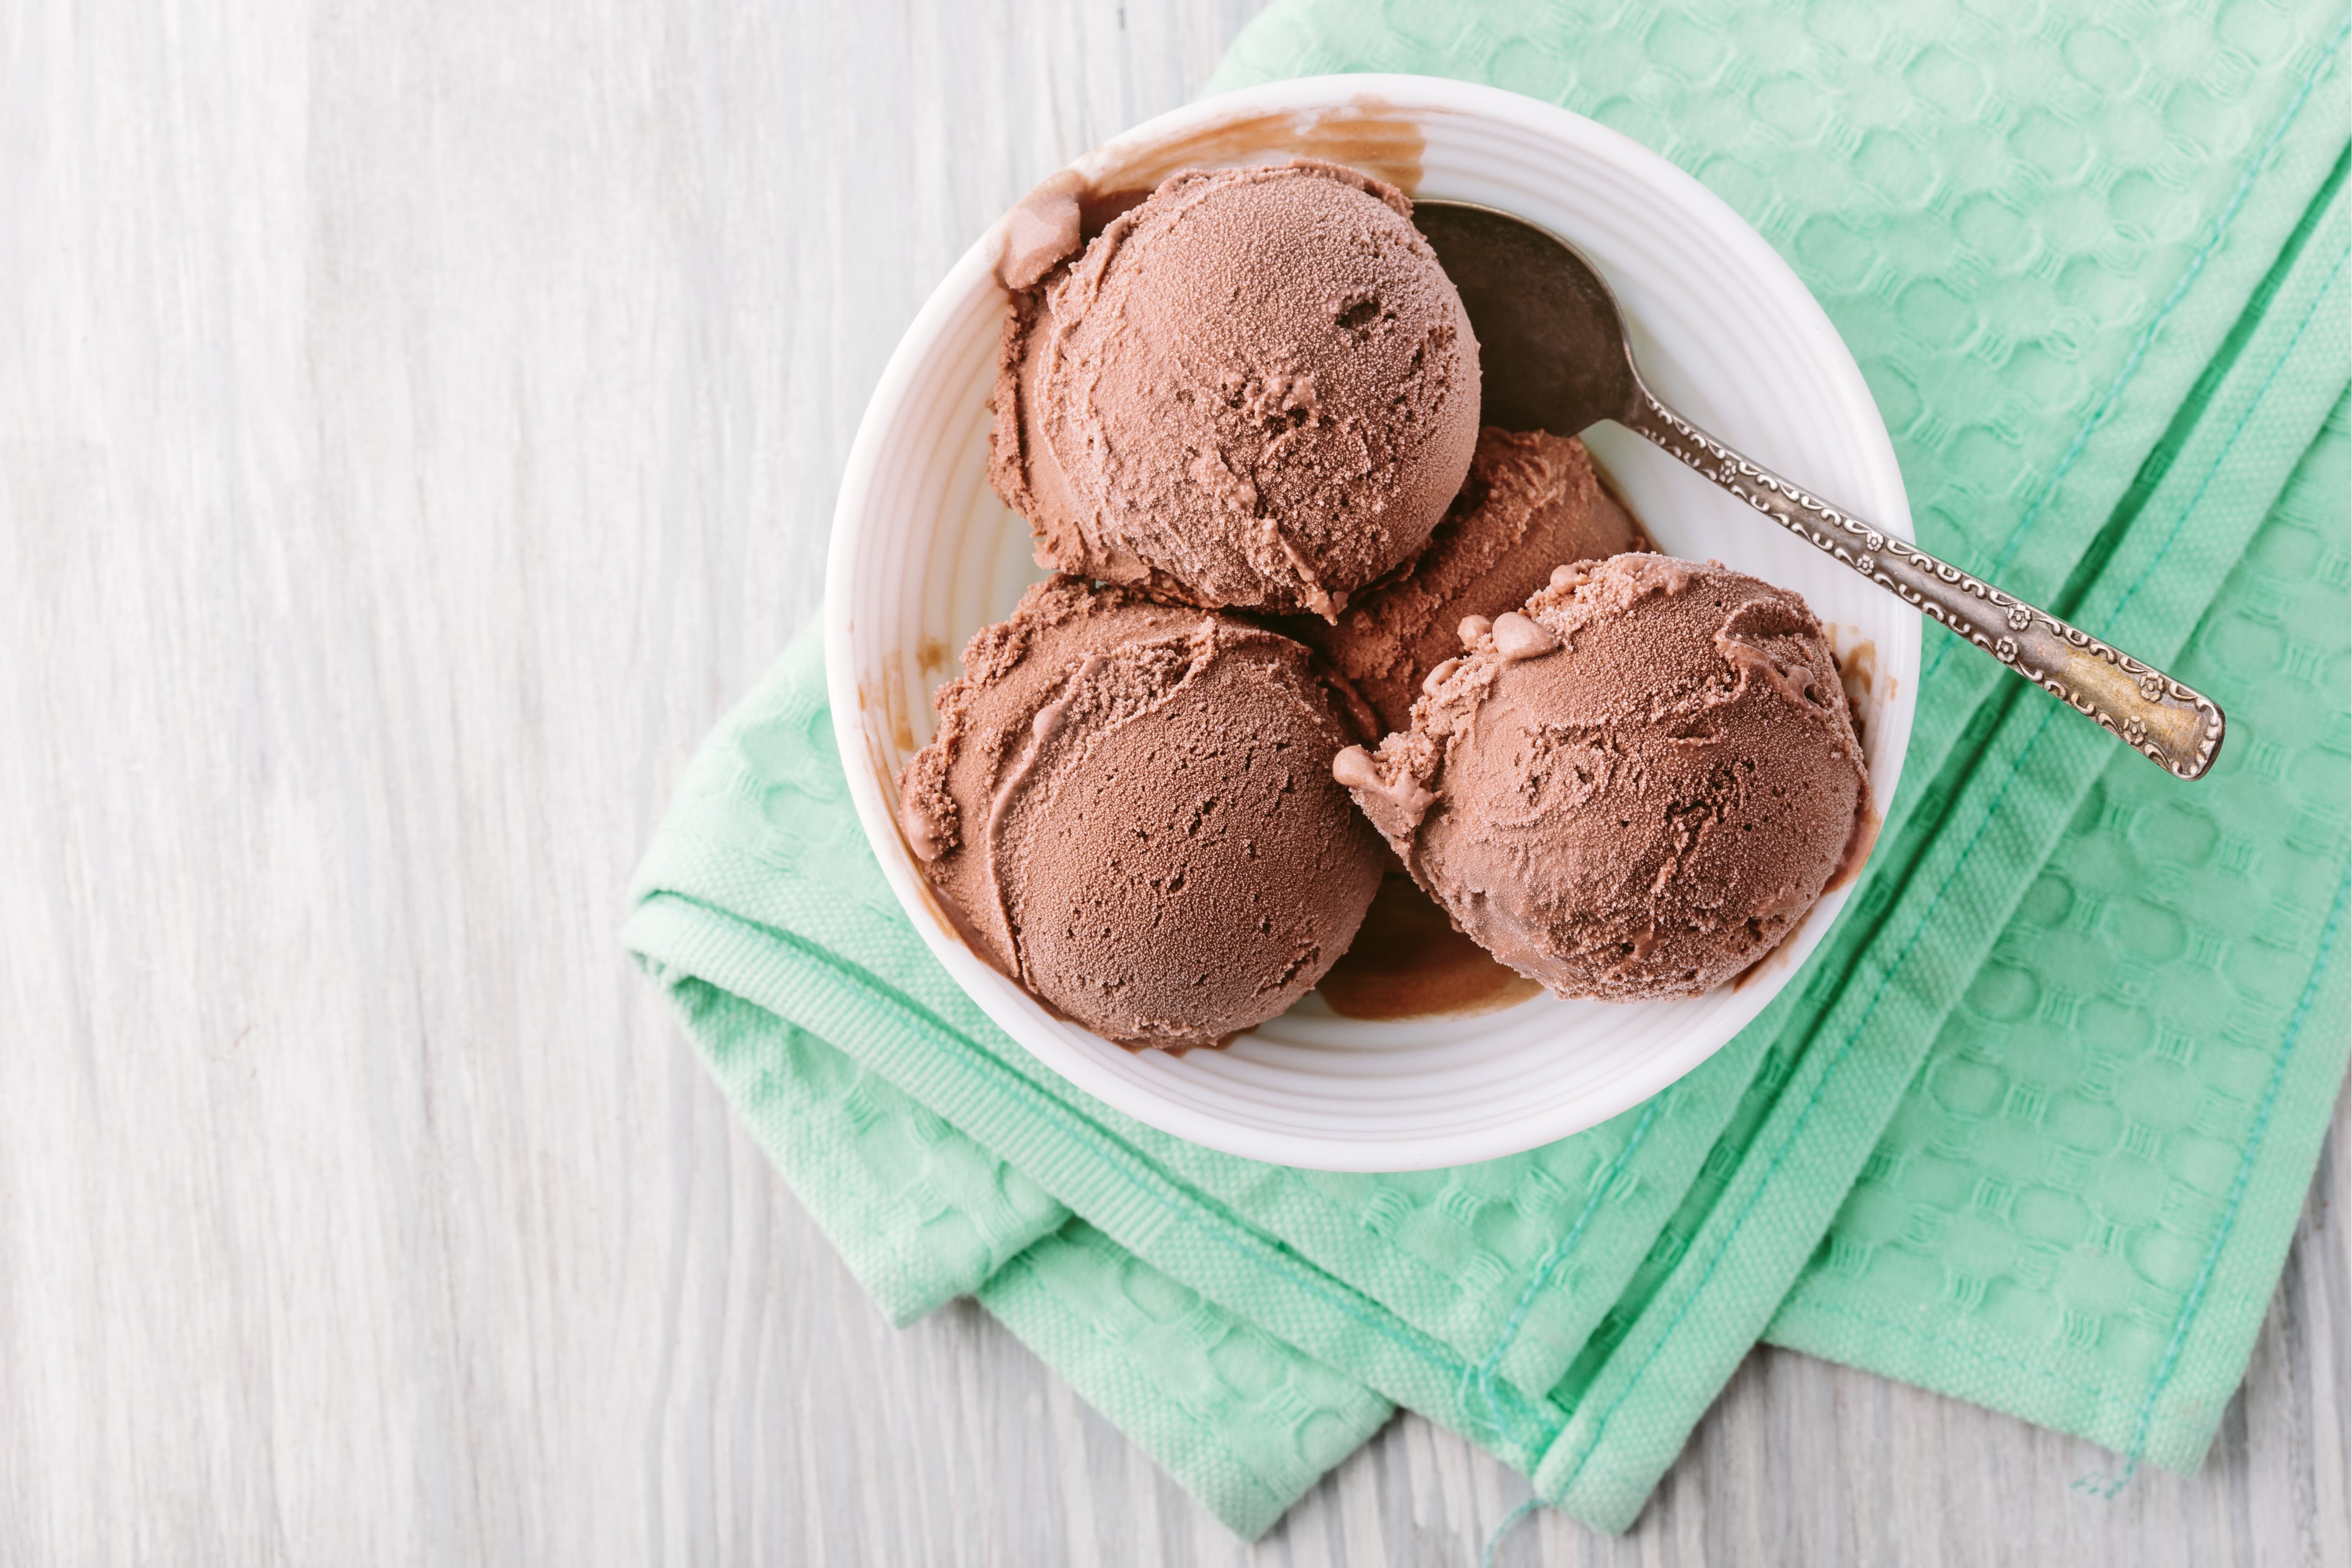 chocolate ice cream in a bowl